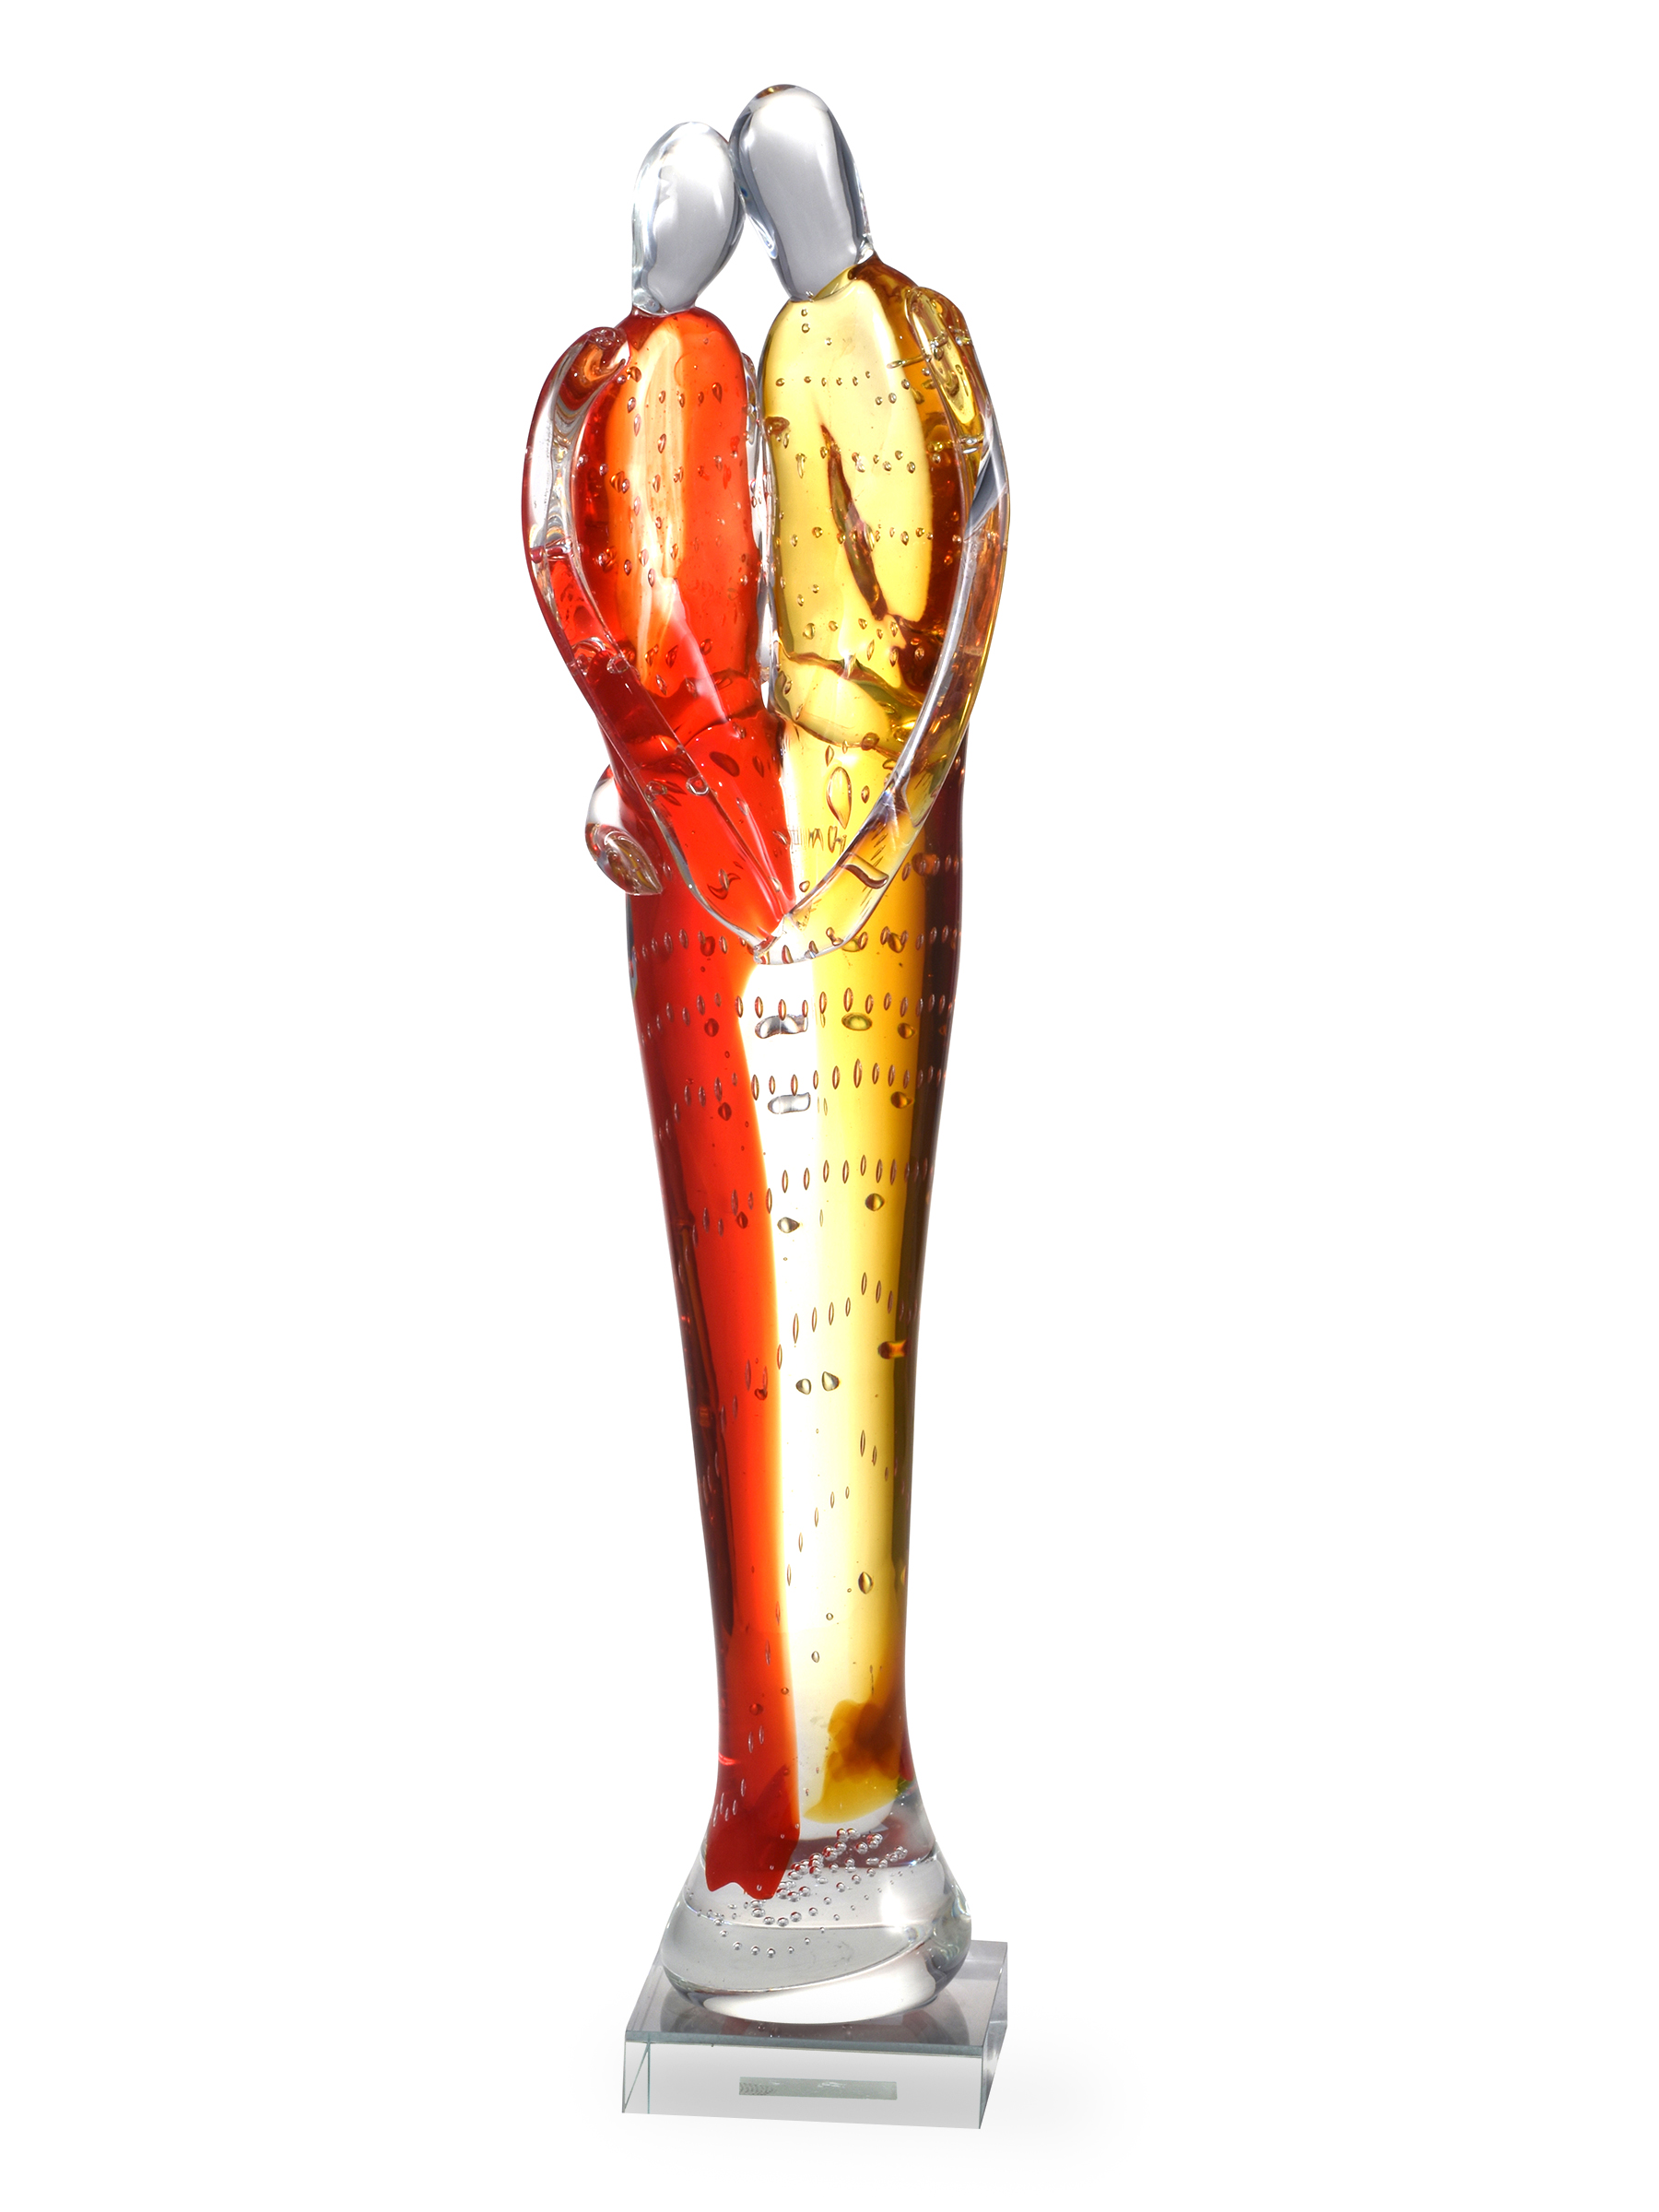 Art Glass Designs 17" Red and Yellow Embracing Couple Art Figurine